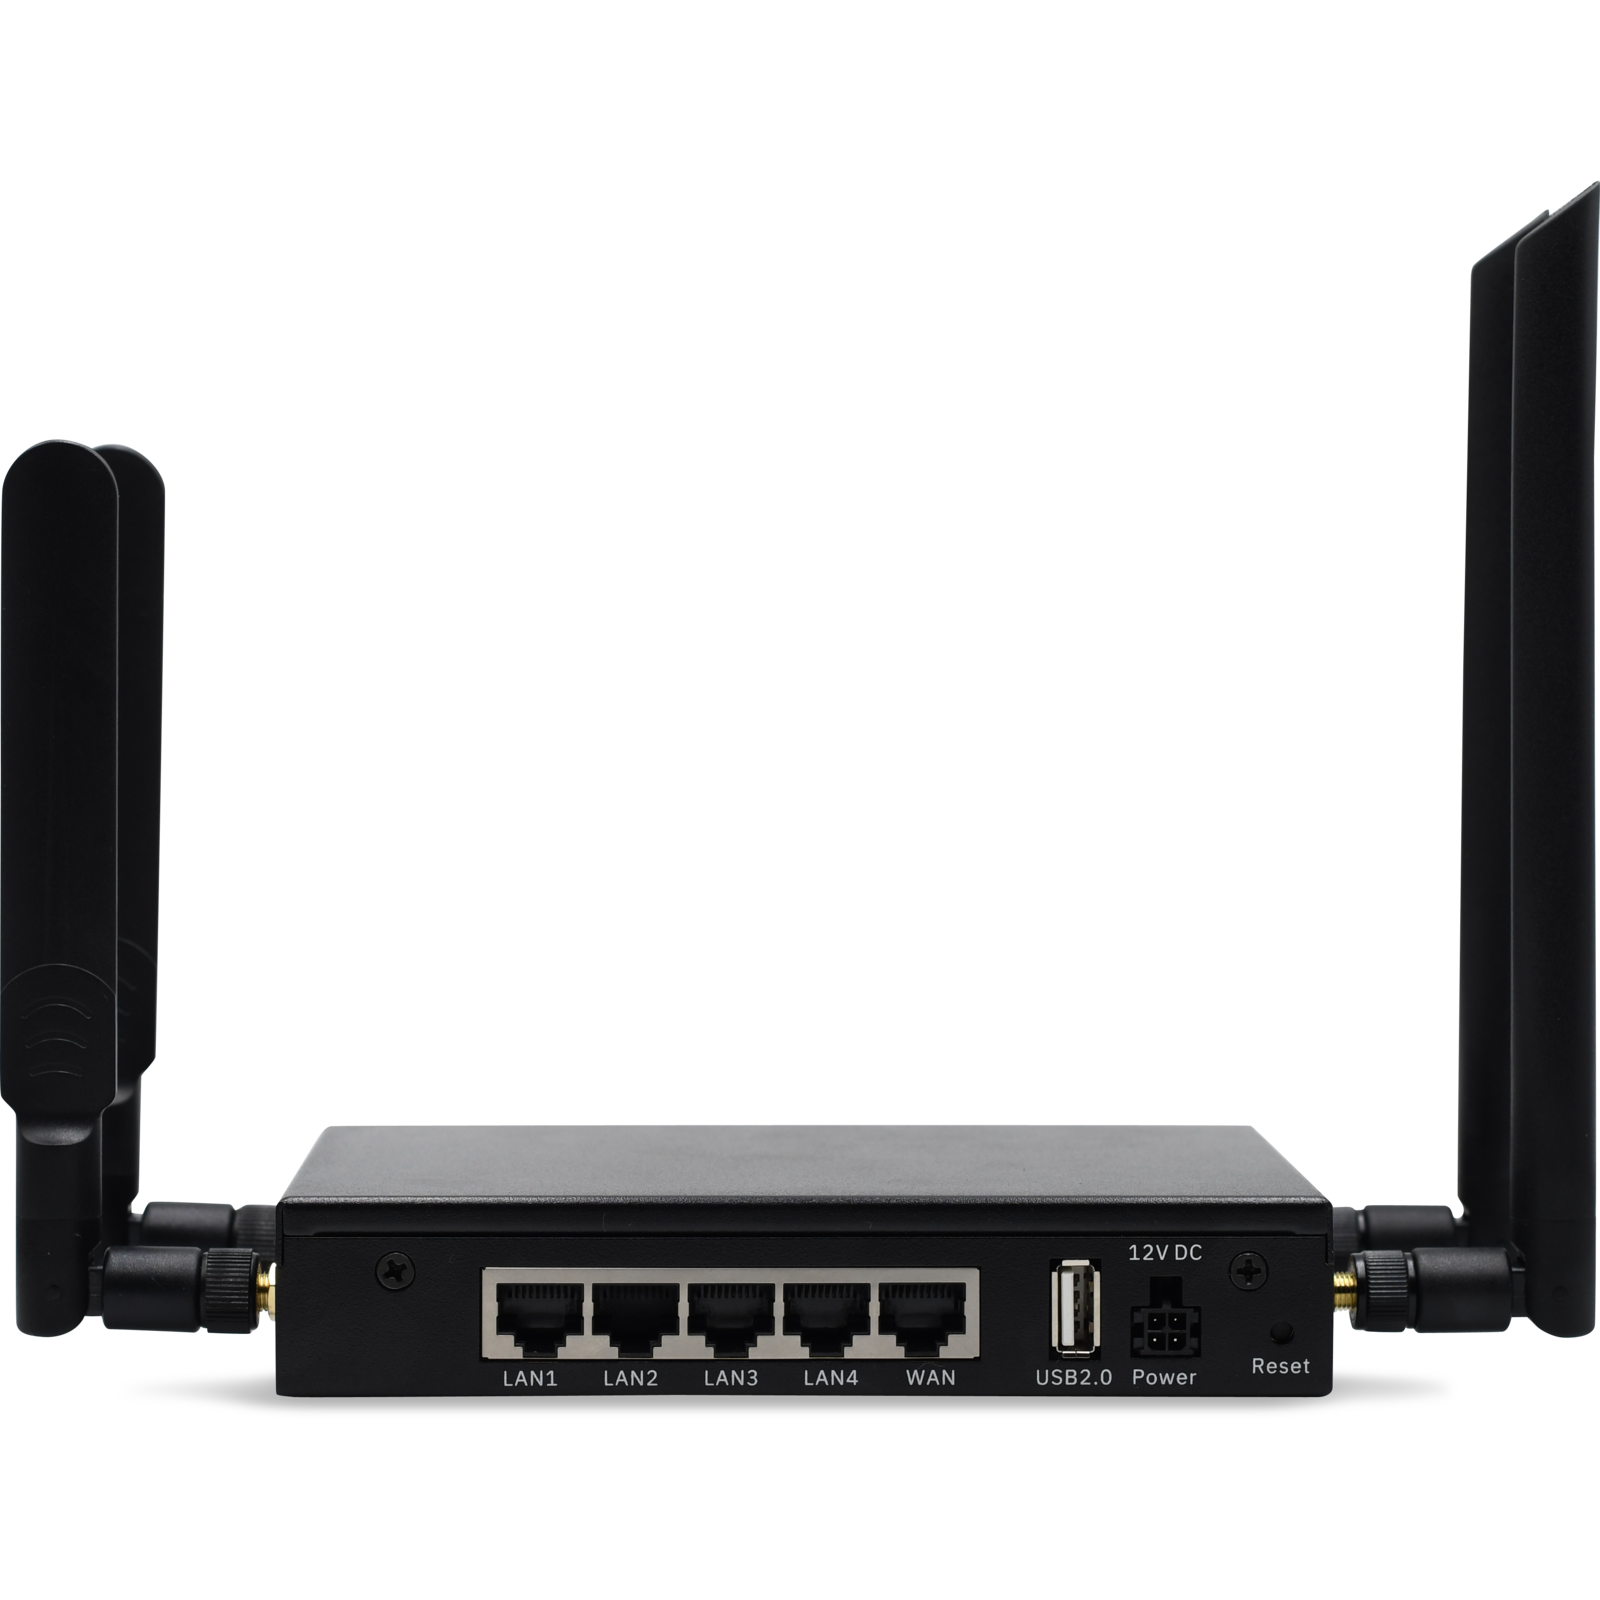 Industrial 4G LTE Router with Virtual SIM, eSIM Router Supports